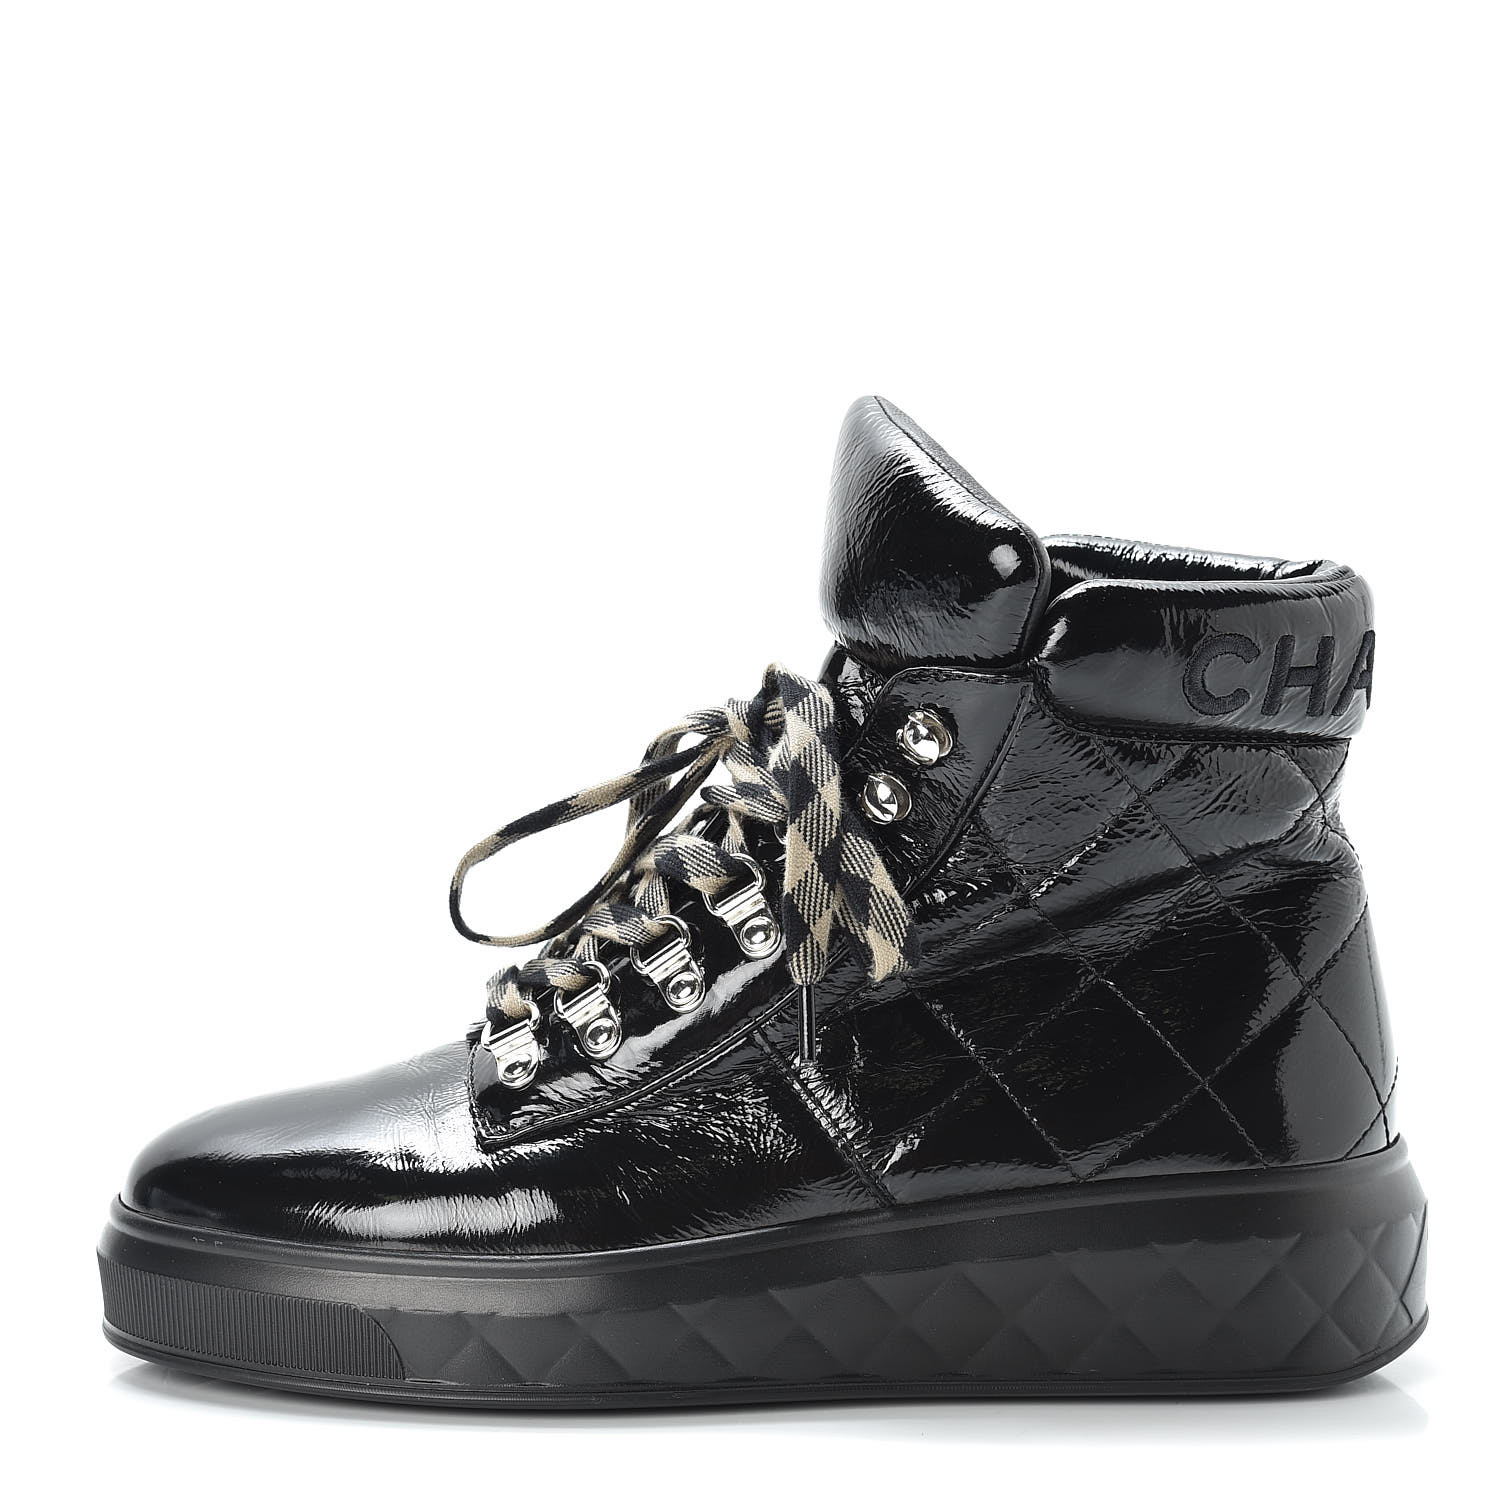 CHANEL Patent Calfskin Quilted Womens High Top Sneakers 37.5 Black 448484